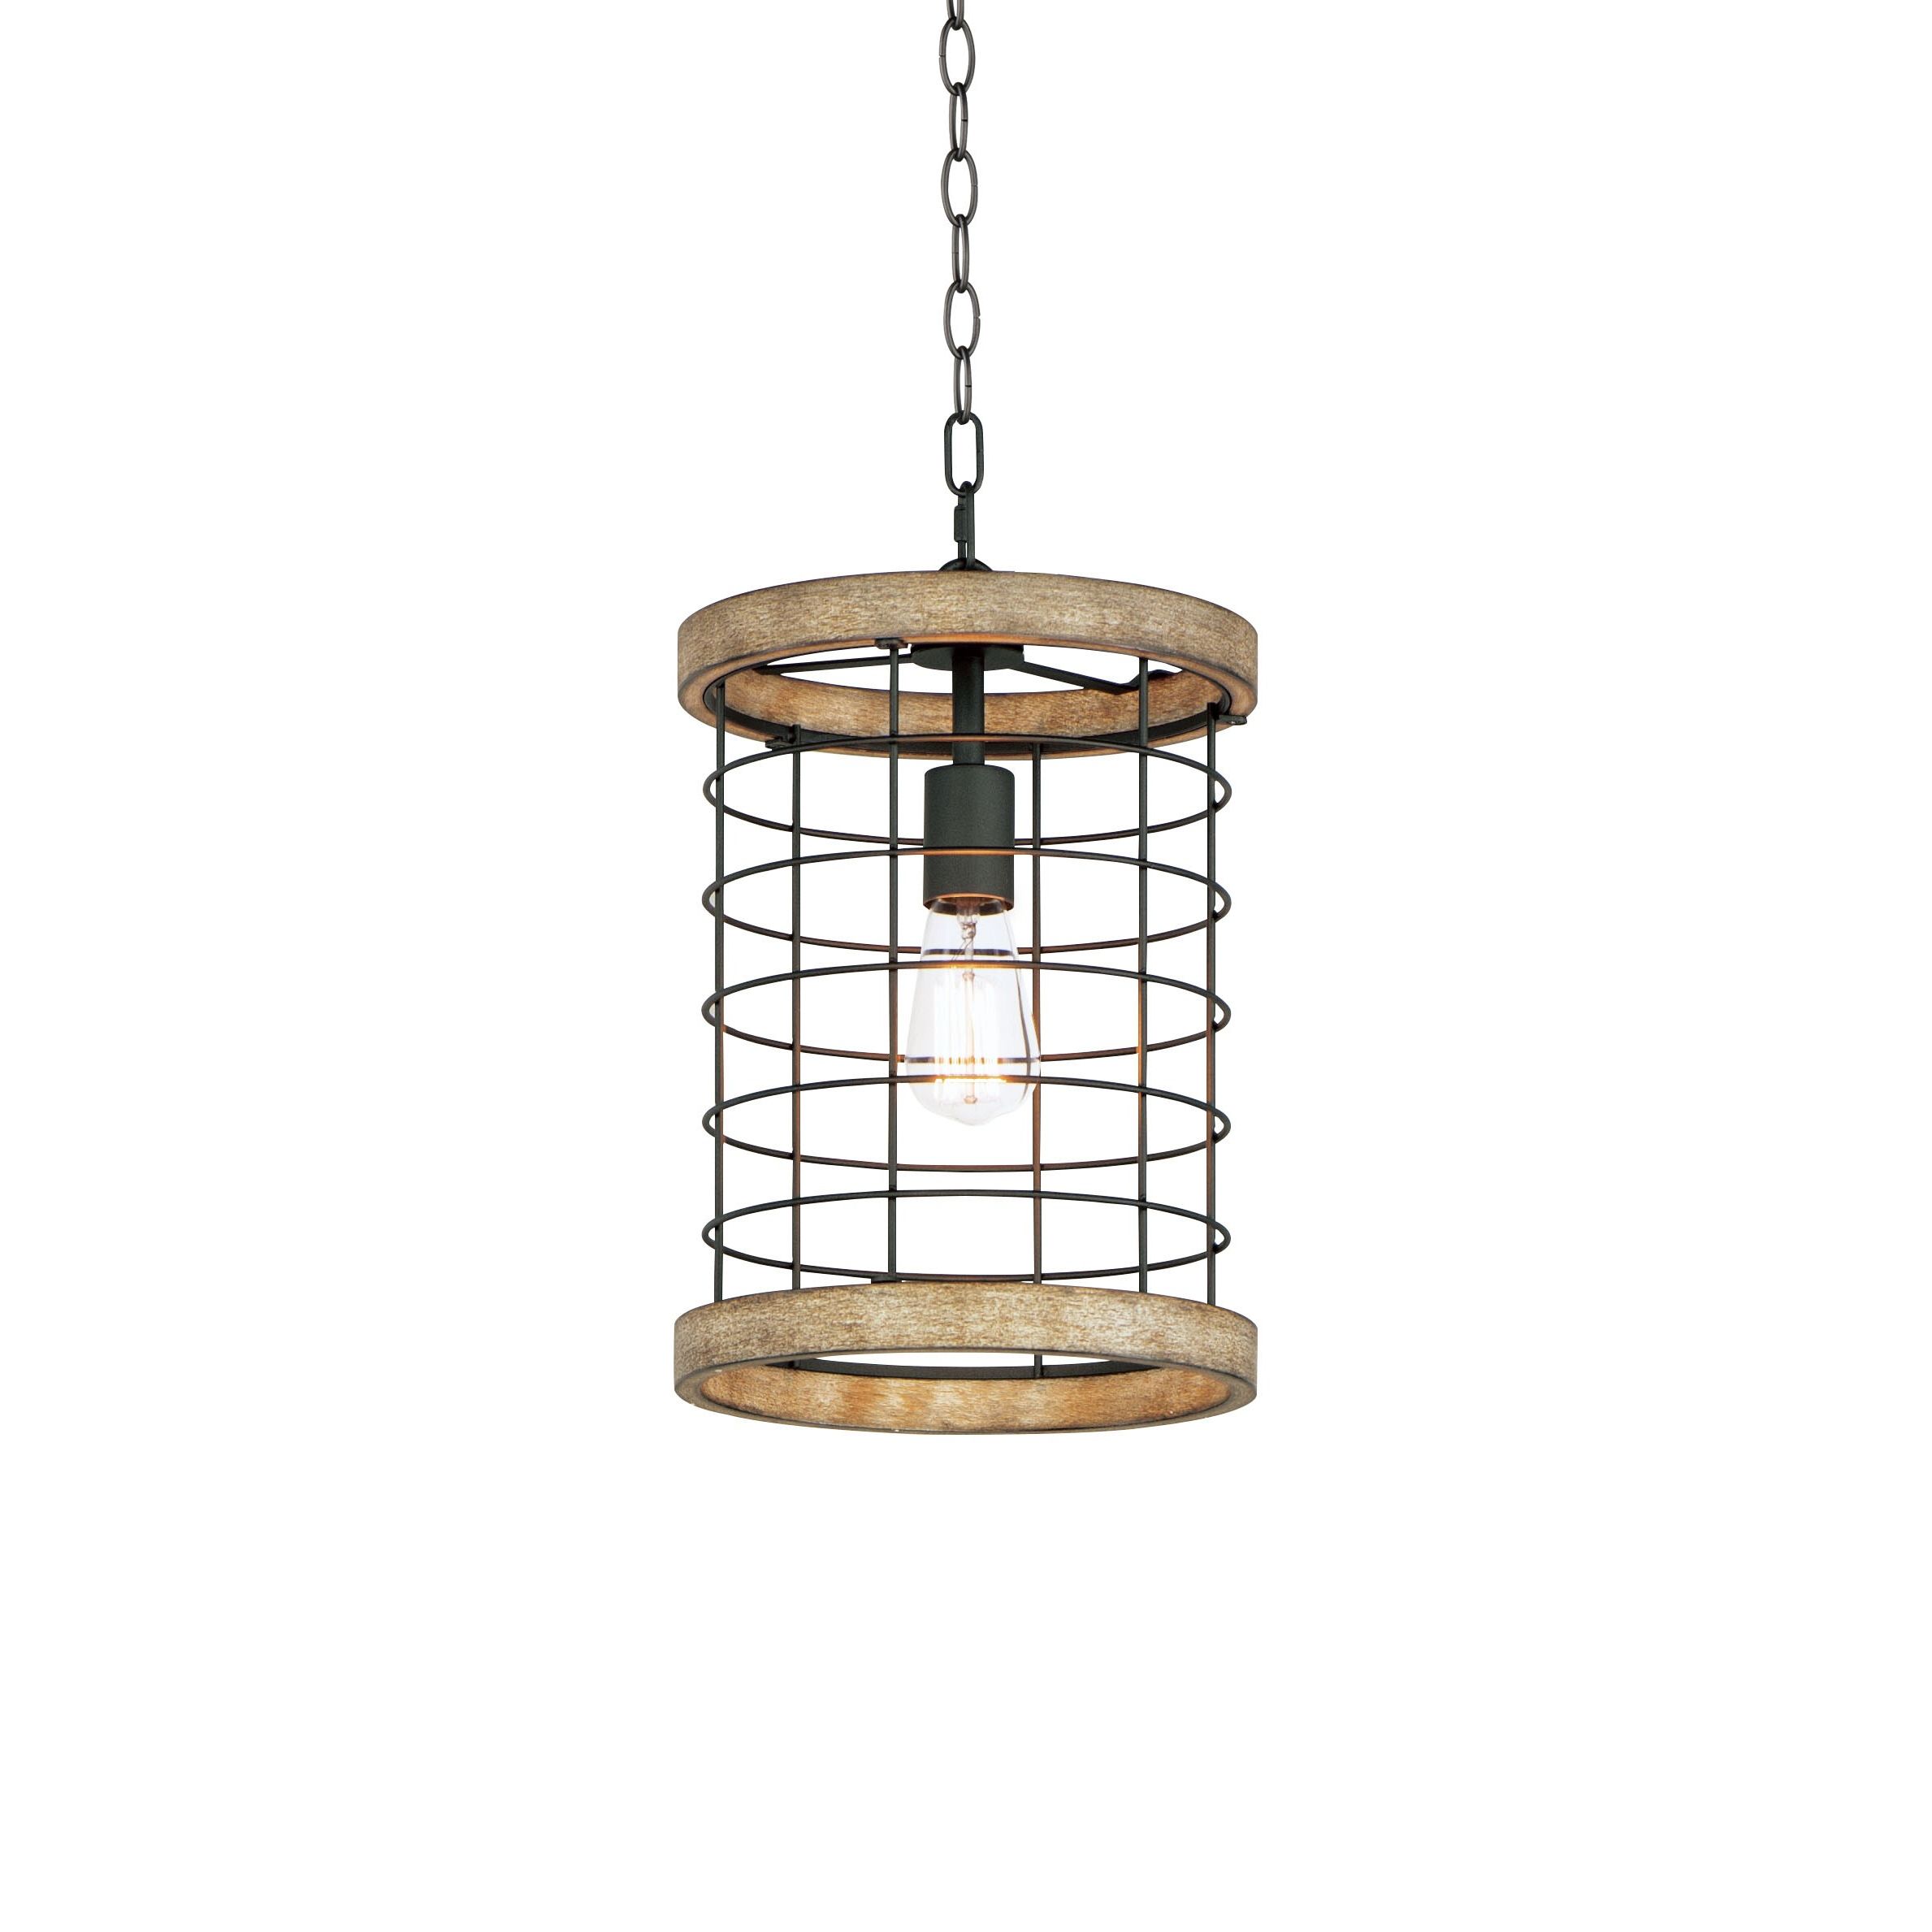 Weathered Driftwood And Gold Lantern Chandeliers Regarding Best And Newest Maxim Lighting Homestead Driftwood/black Rustic Cylinder Pendant Light In  The Pendant Lighting Department At Lowes (View 8 of 15)